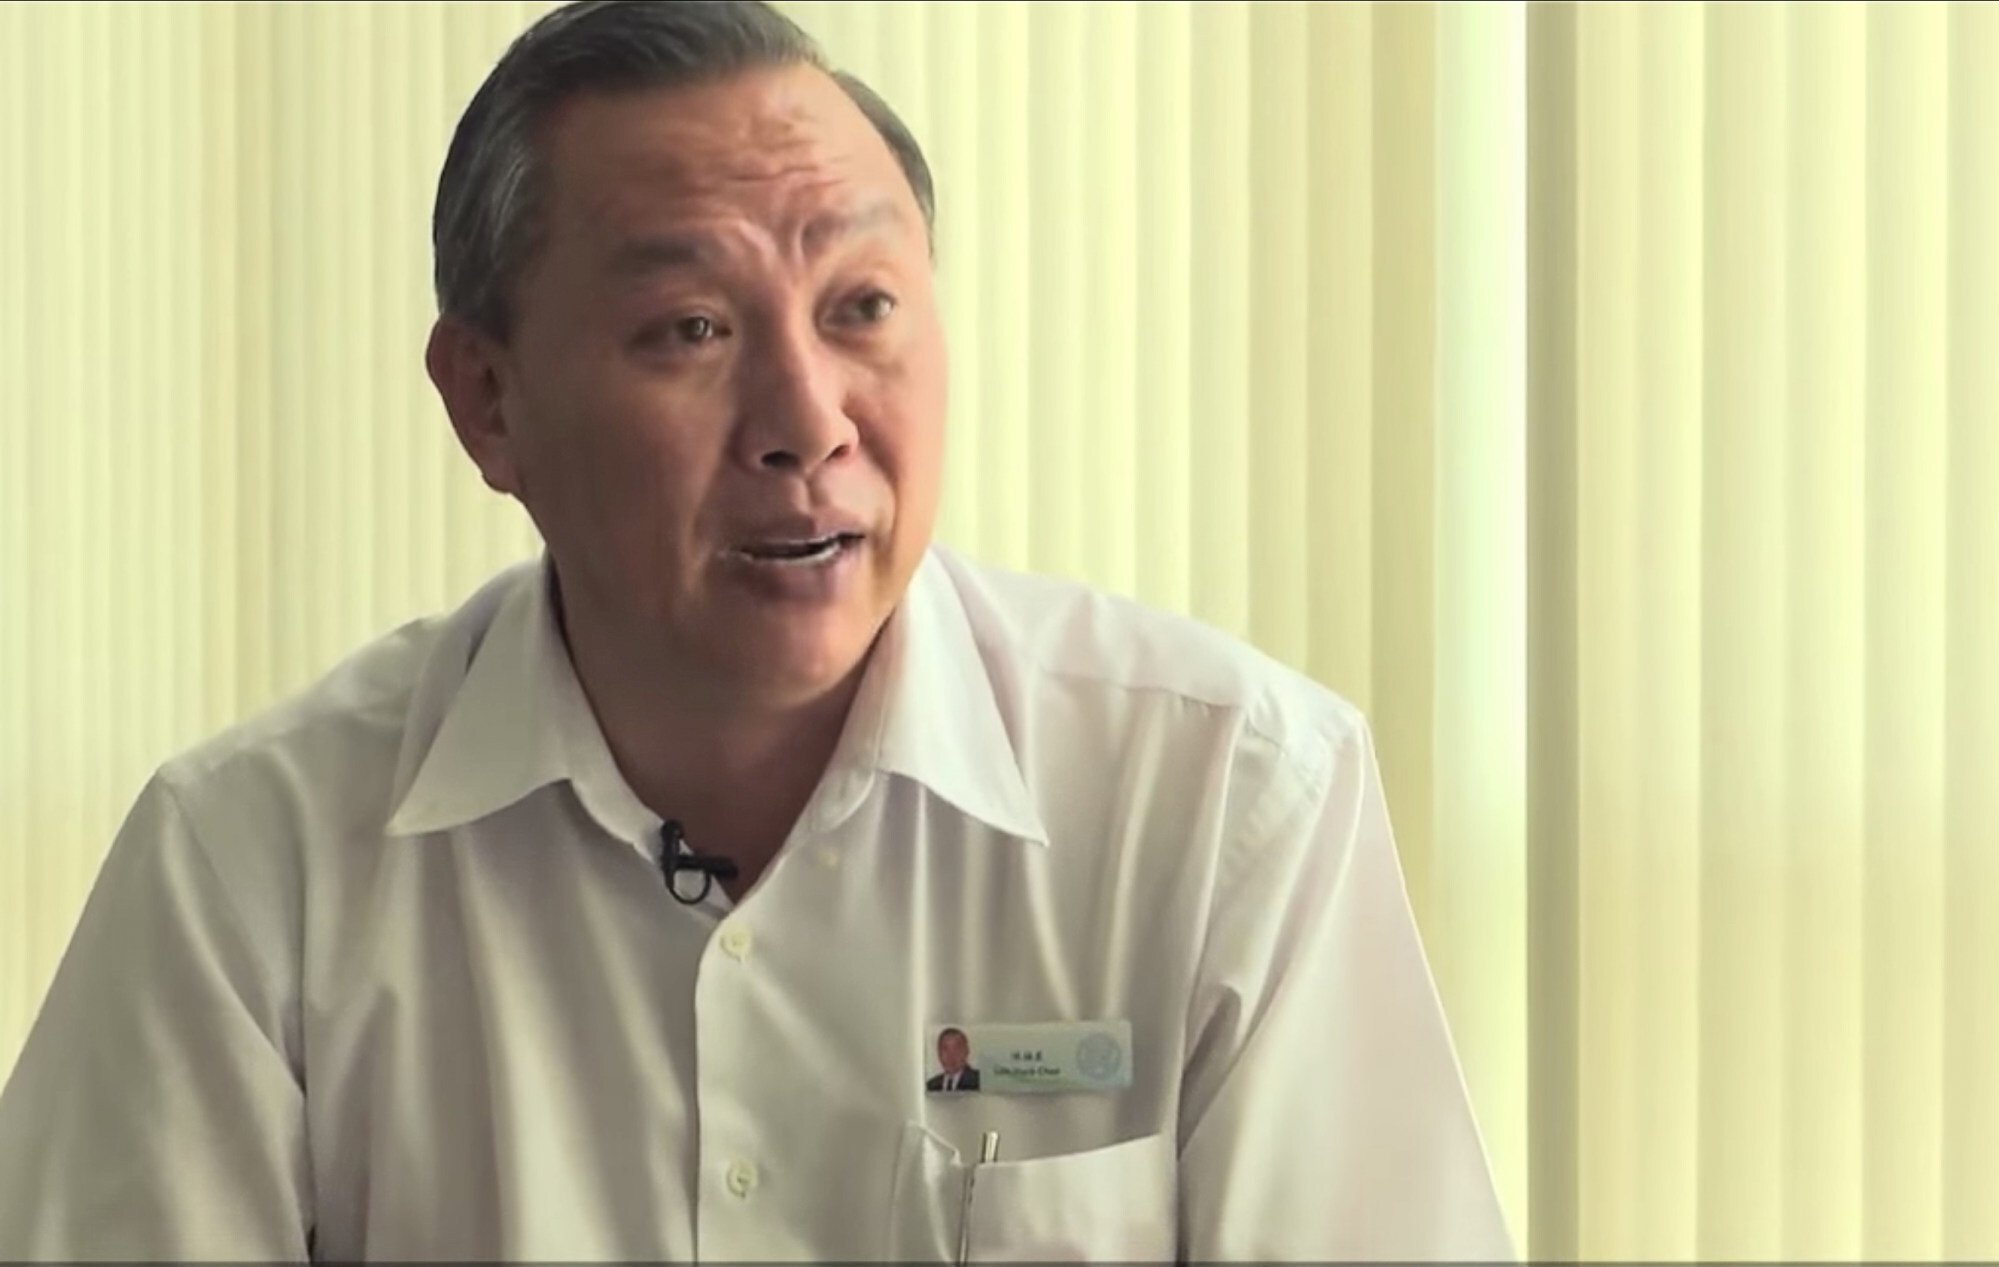 Lim Hock Chee, the chief executive of Singapore supermarket chain Sheng Siong. Photo: Singapore Institute of Technology (SIT) YouTube